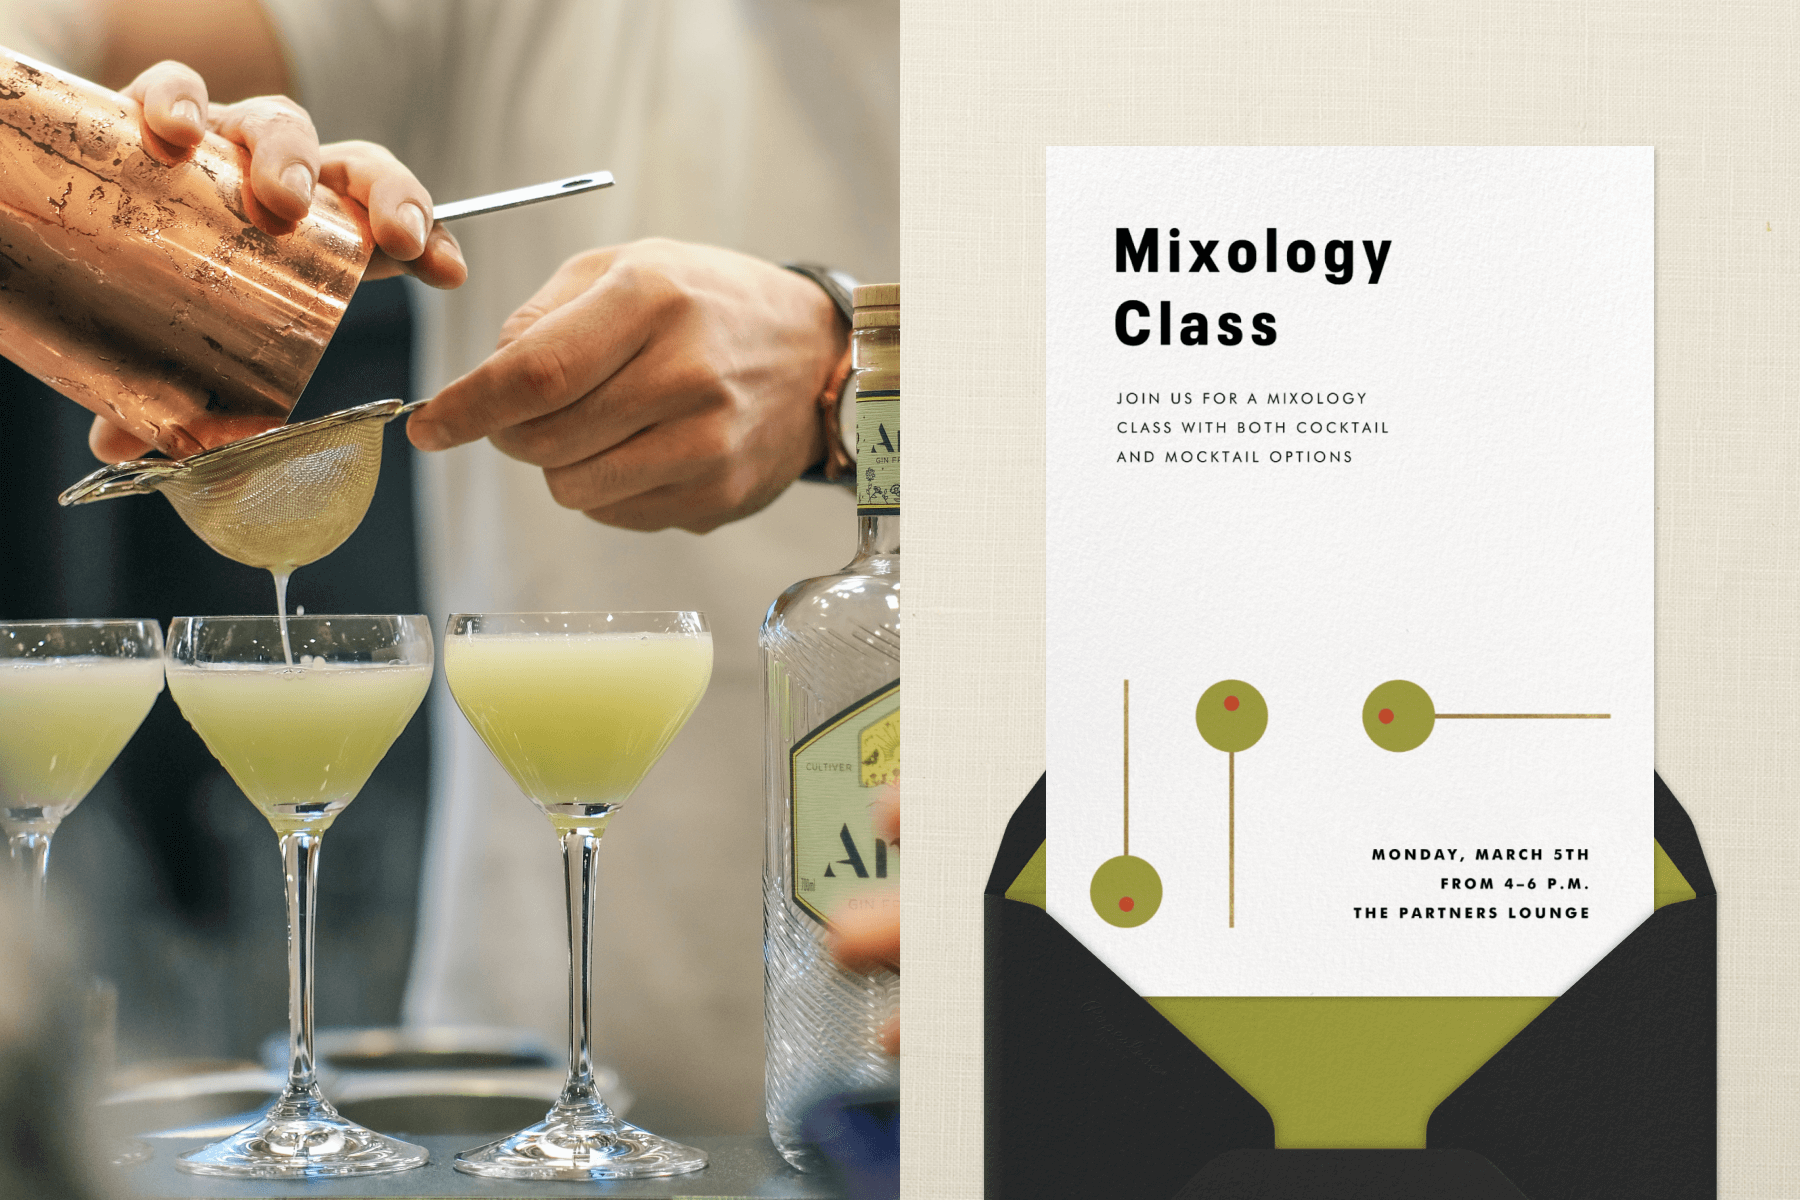 Left: A person’s hands pour a light green cocktail mixture from a copper shaker through a strainer into three stemmed glasses. Right: An invitation for a mixology class has three simplified illustrated green cocktail olives on picks.